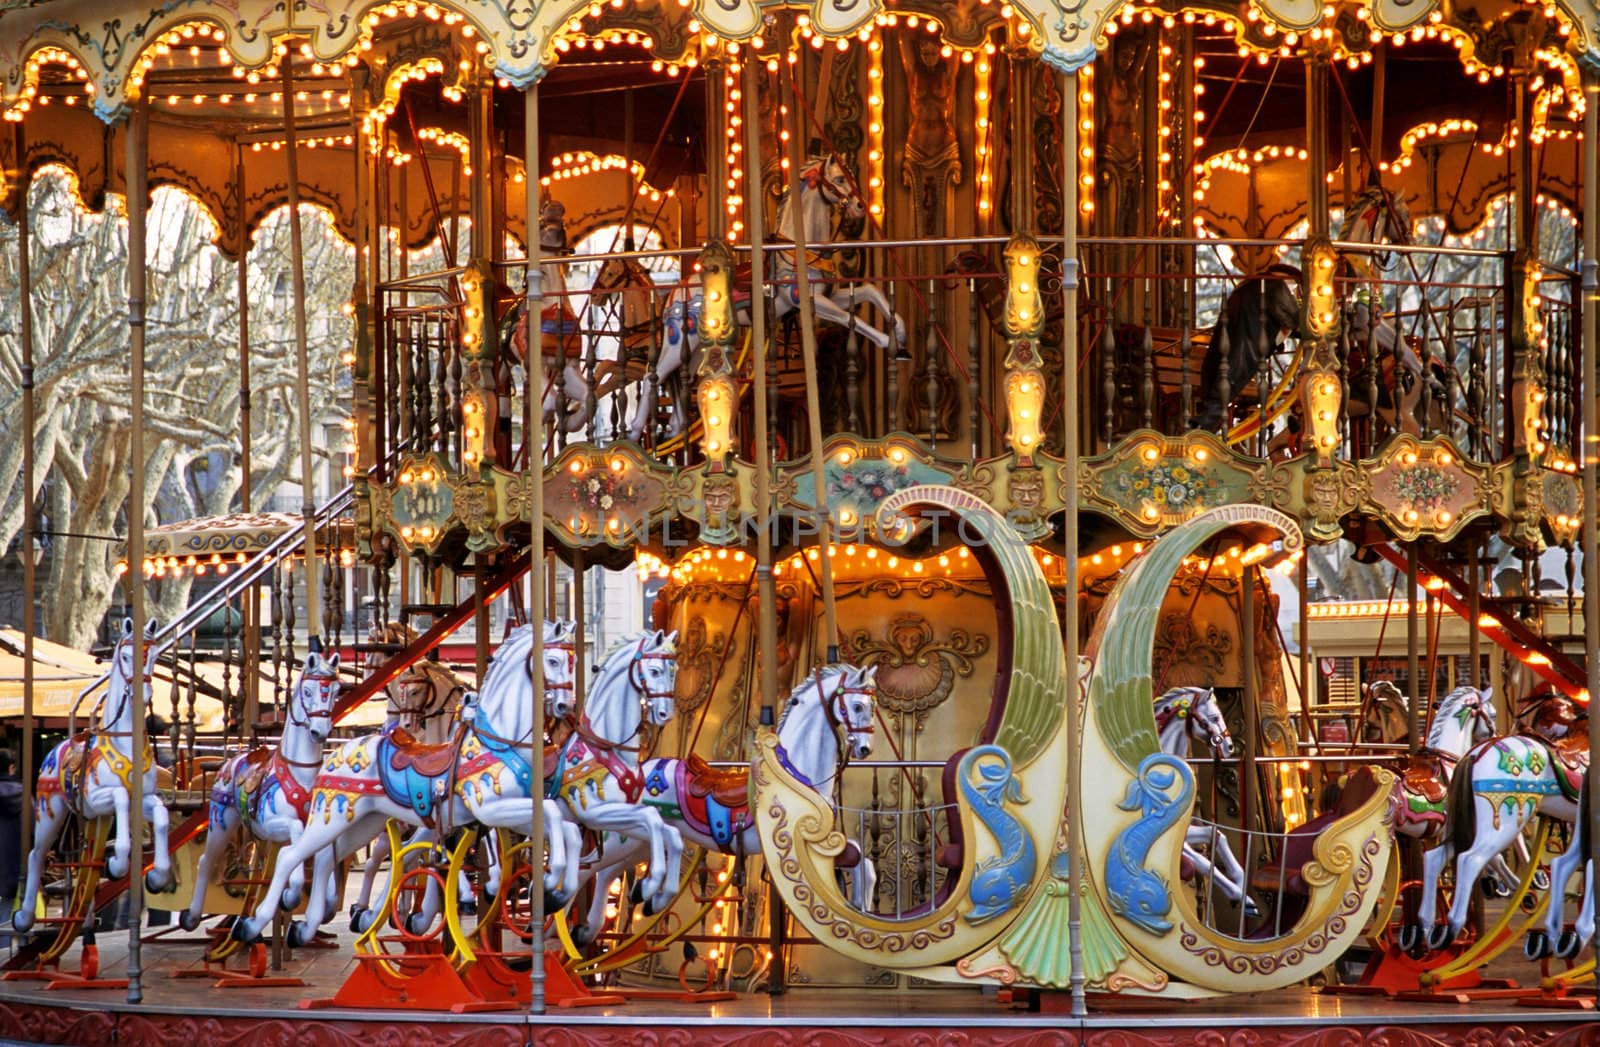 An illuminated antique Carousel awaits eager riders in the main square of Avignon, France.